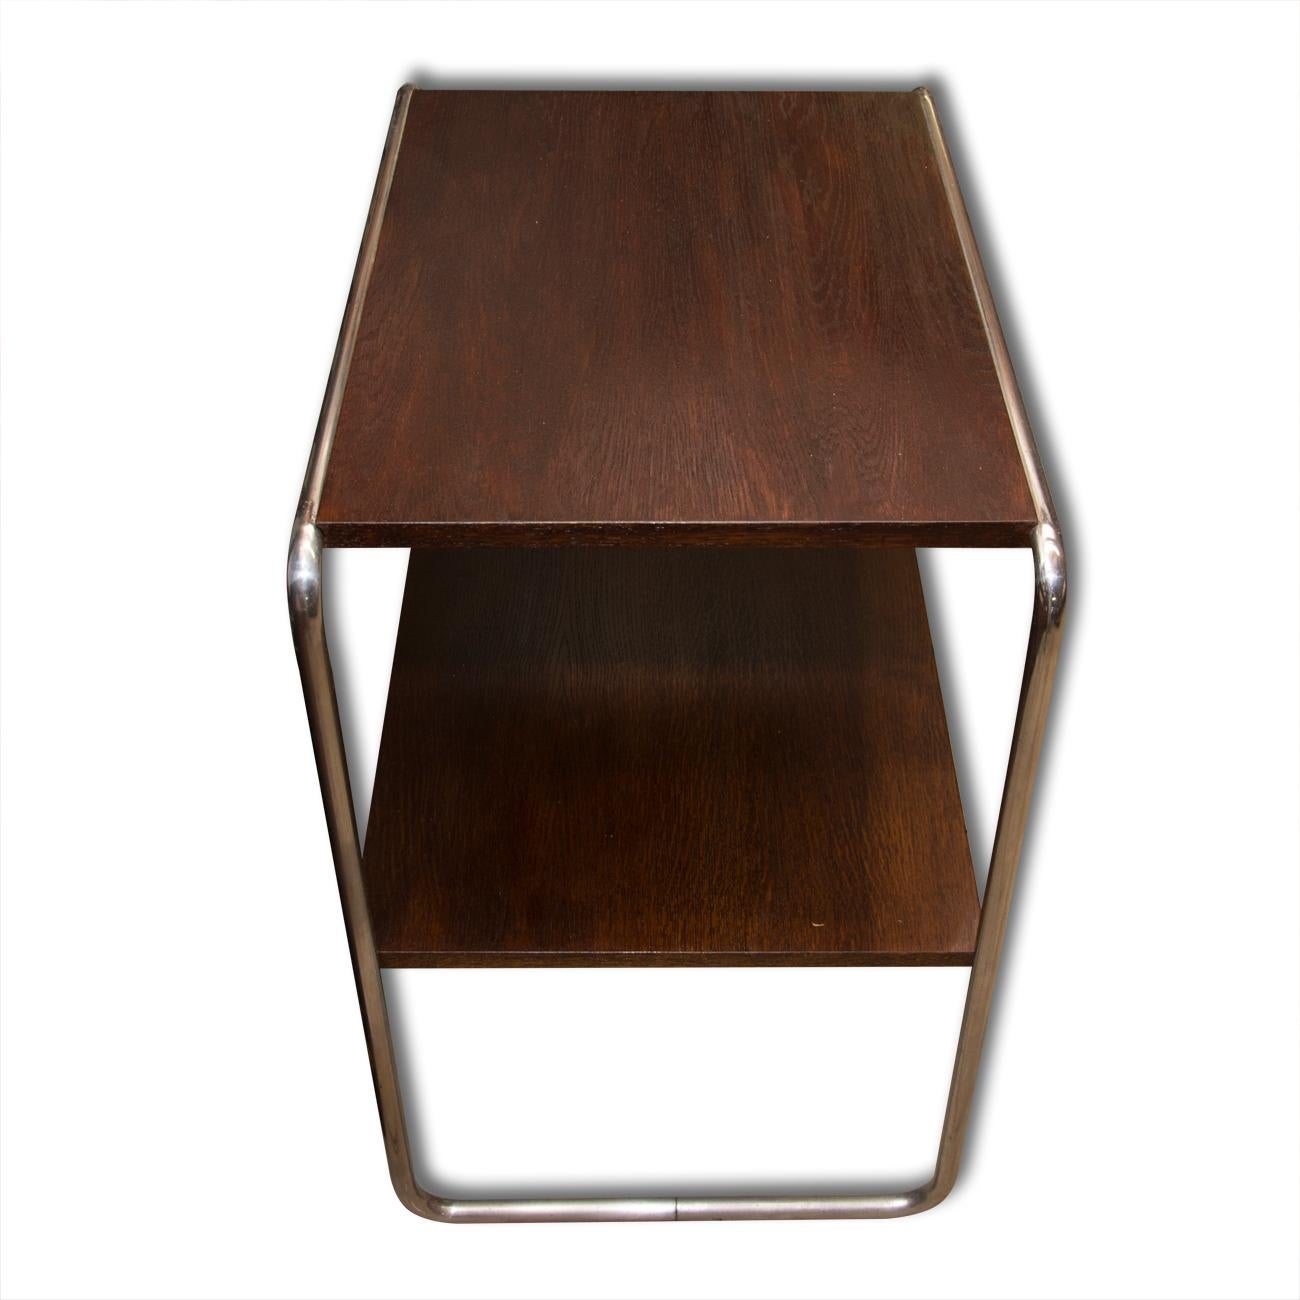 Bauhause Side Table designed by Marcel Breuer, 1930s In Good Condition In Prague 8, CZ